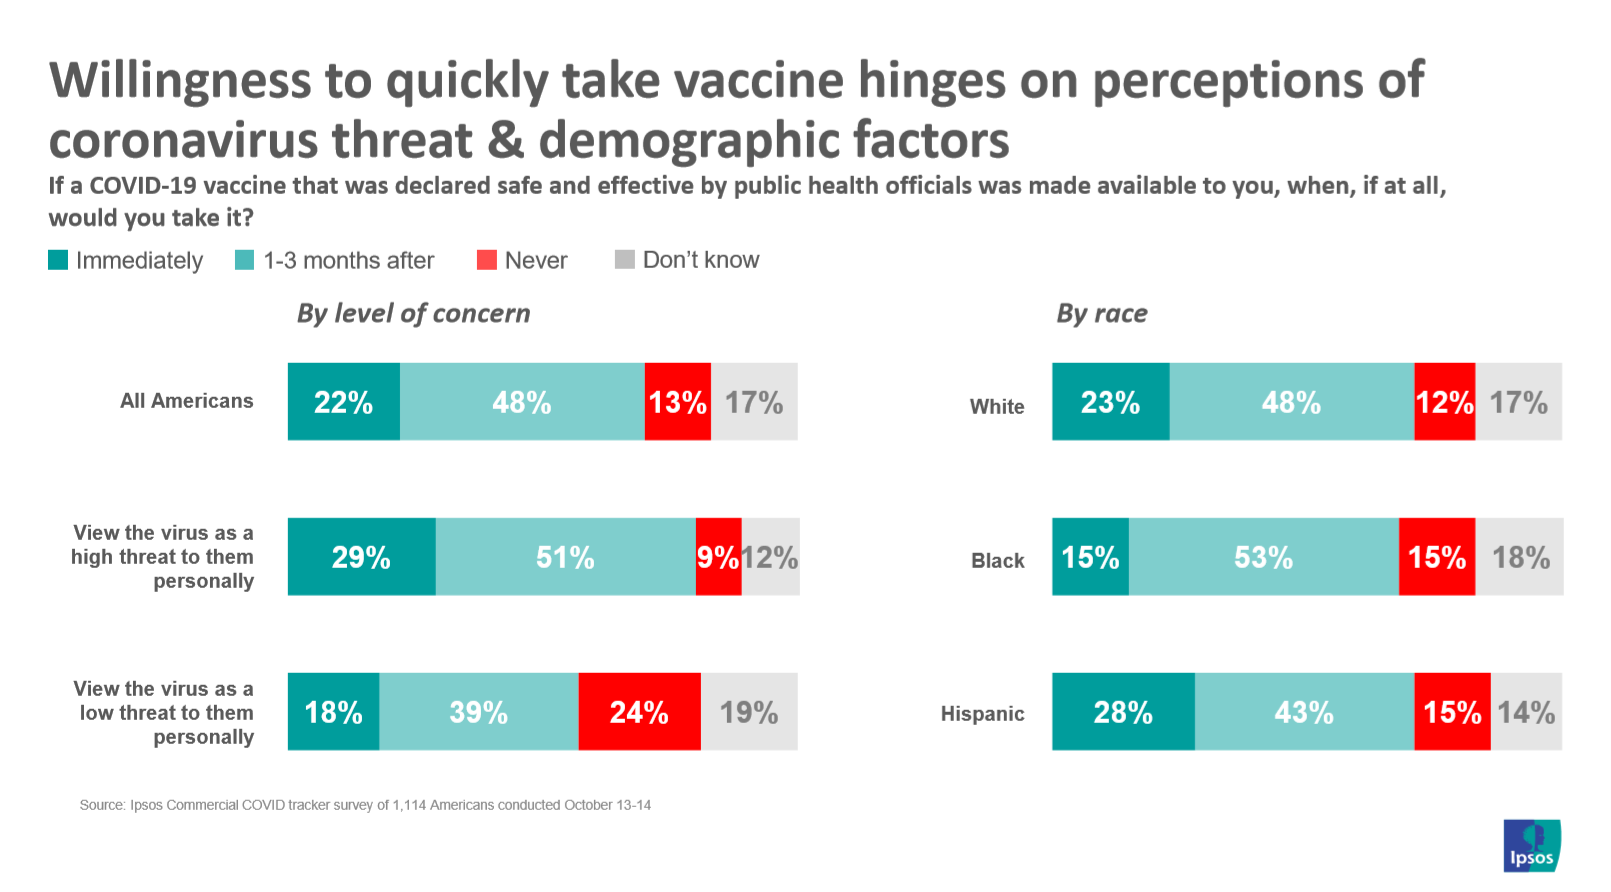 When Americans would prefer to take the vaccine